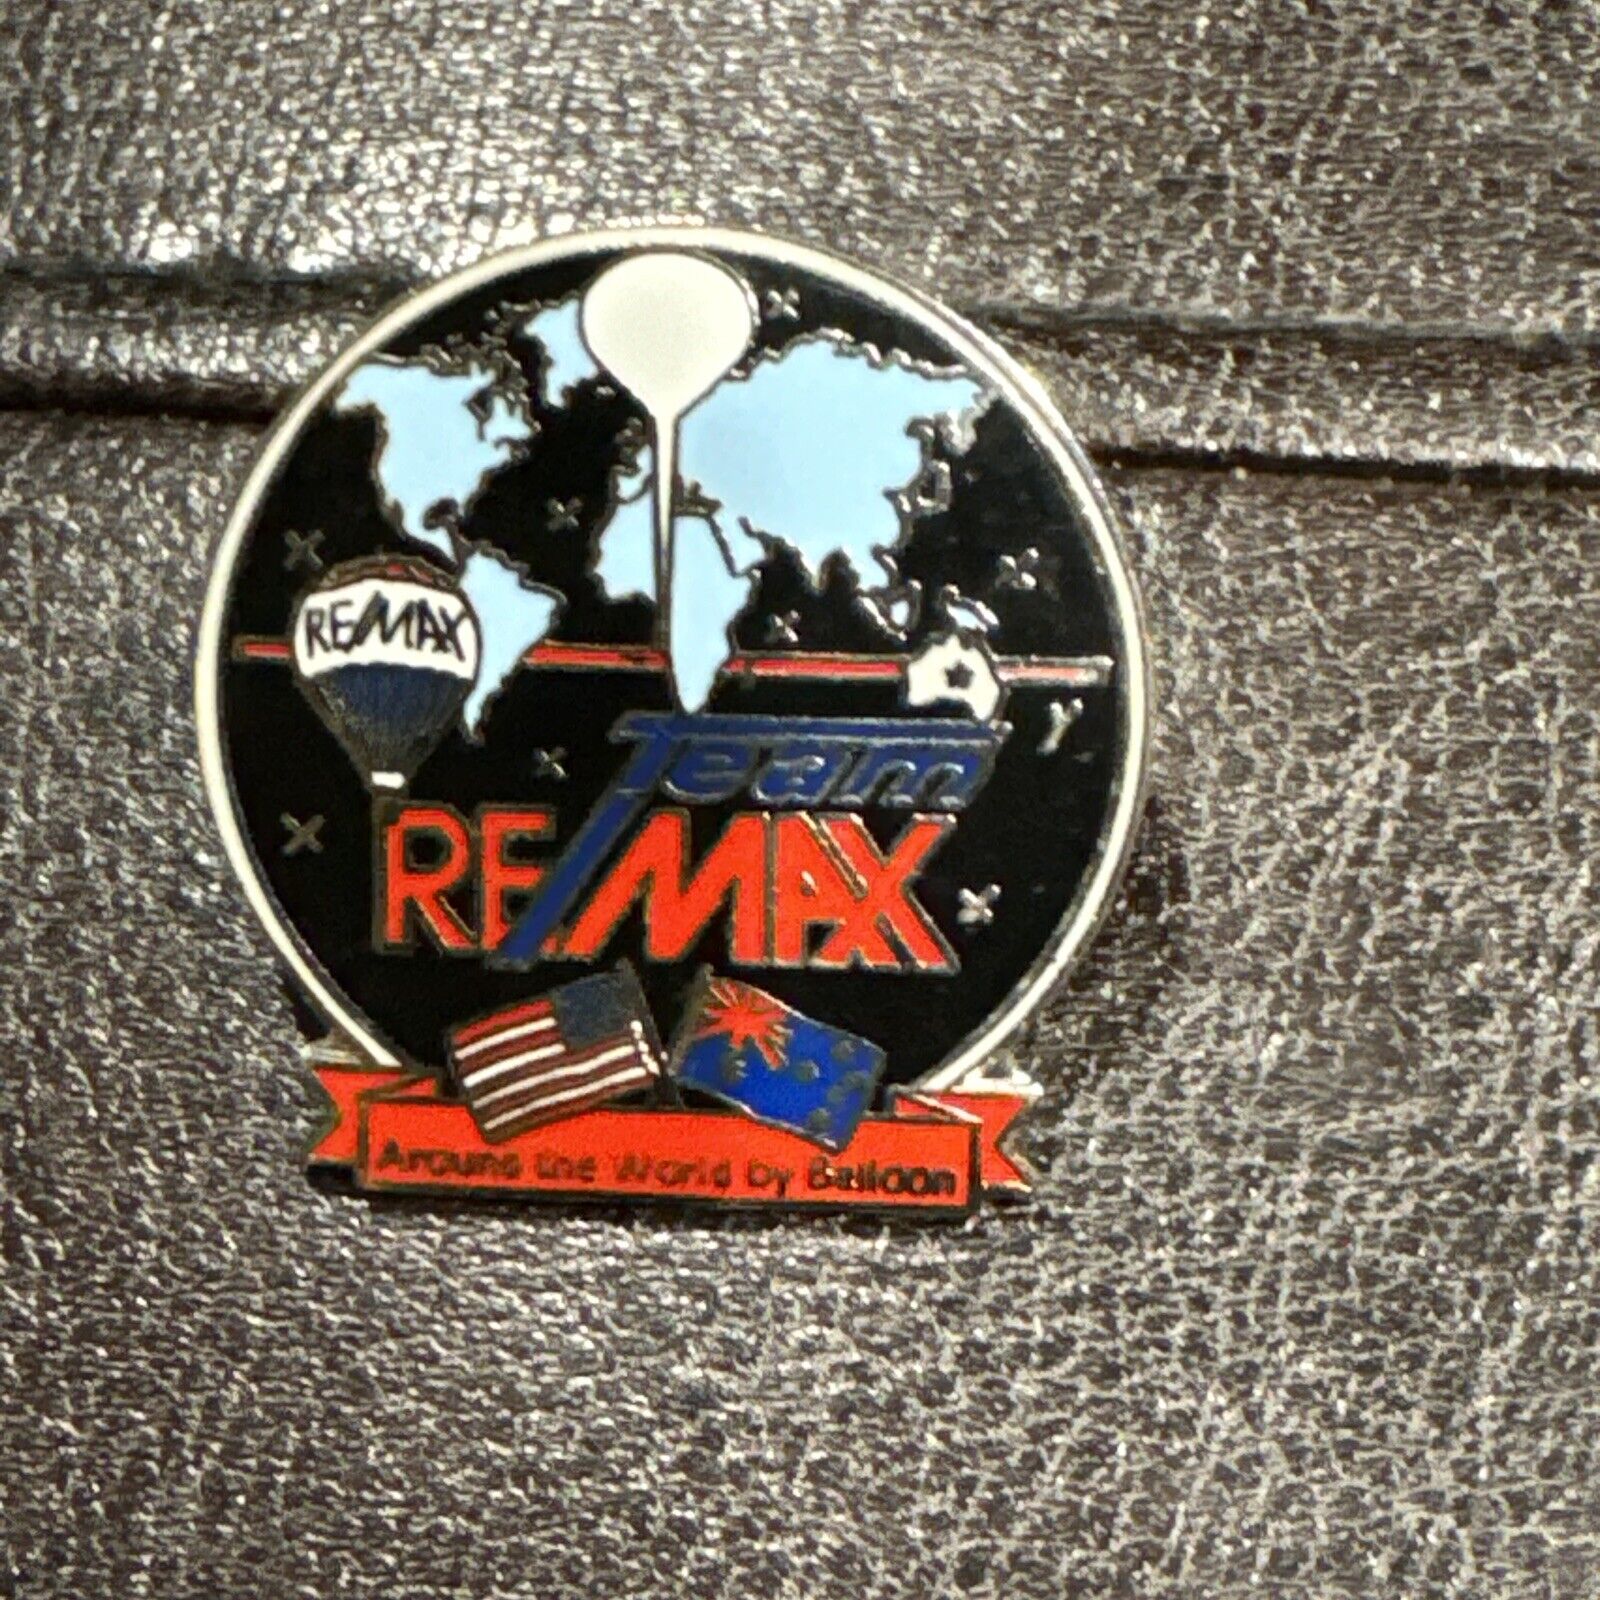 Team Remax Lapel Hat Pin Around The World In A Balloon With Flags